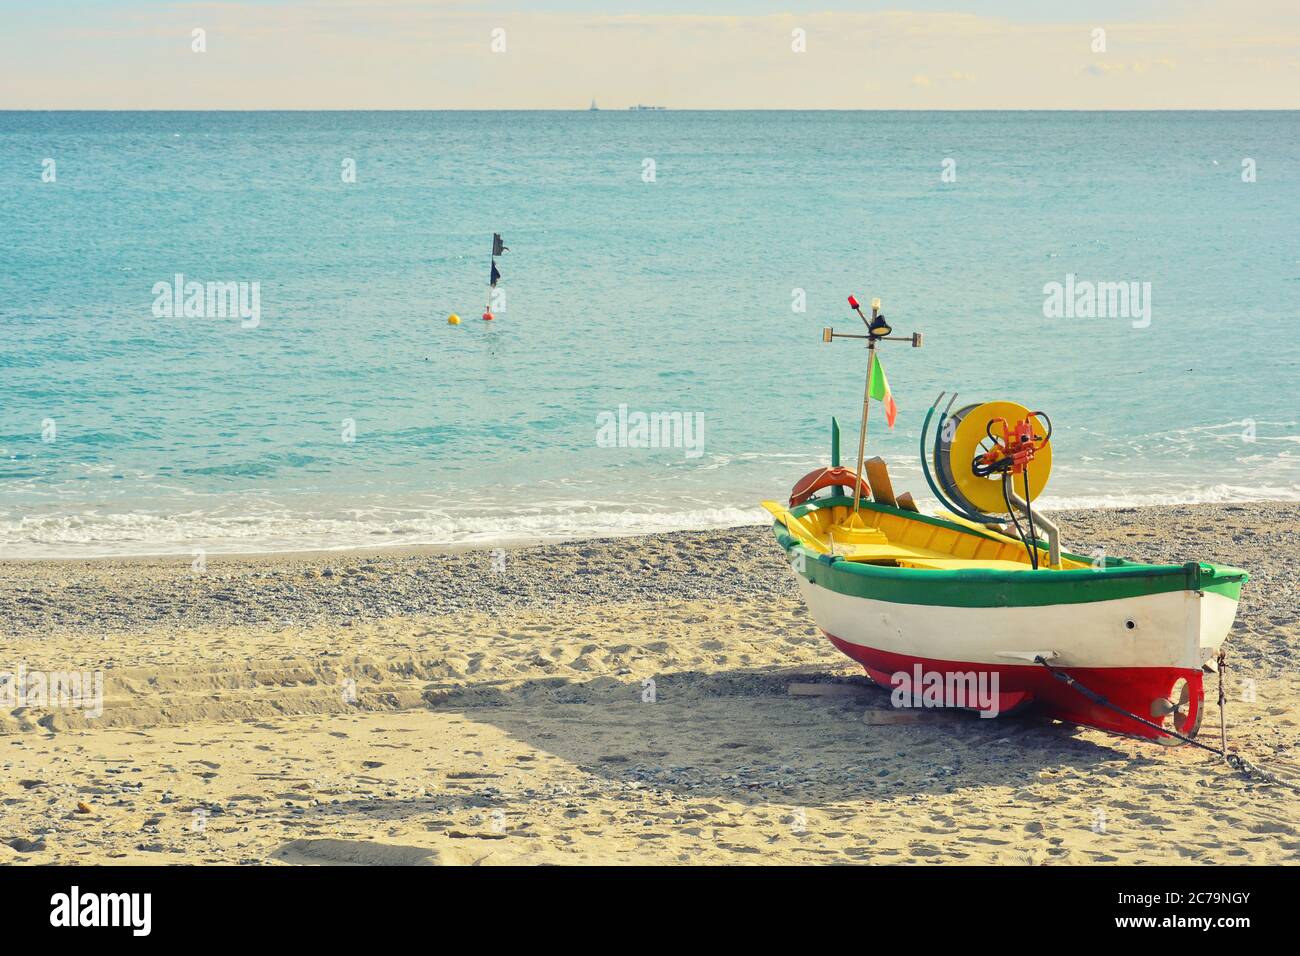 Noli, Savona, Liguria, Italy. A boat aground on the beach of Noli, a seaside village in the province of Savona, on a clear winter day. Stock Photo